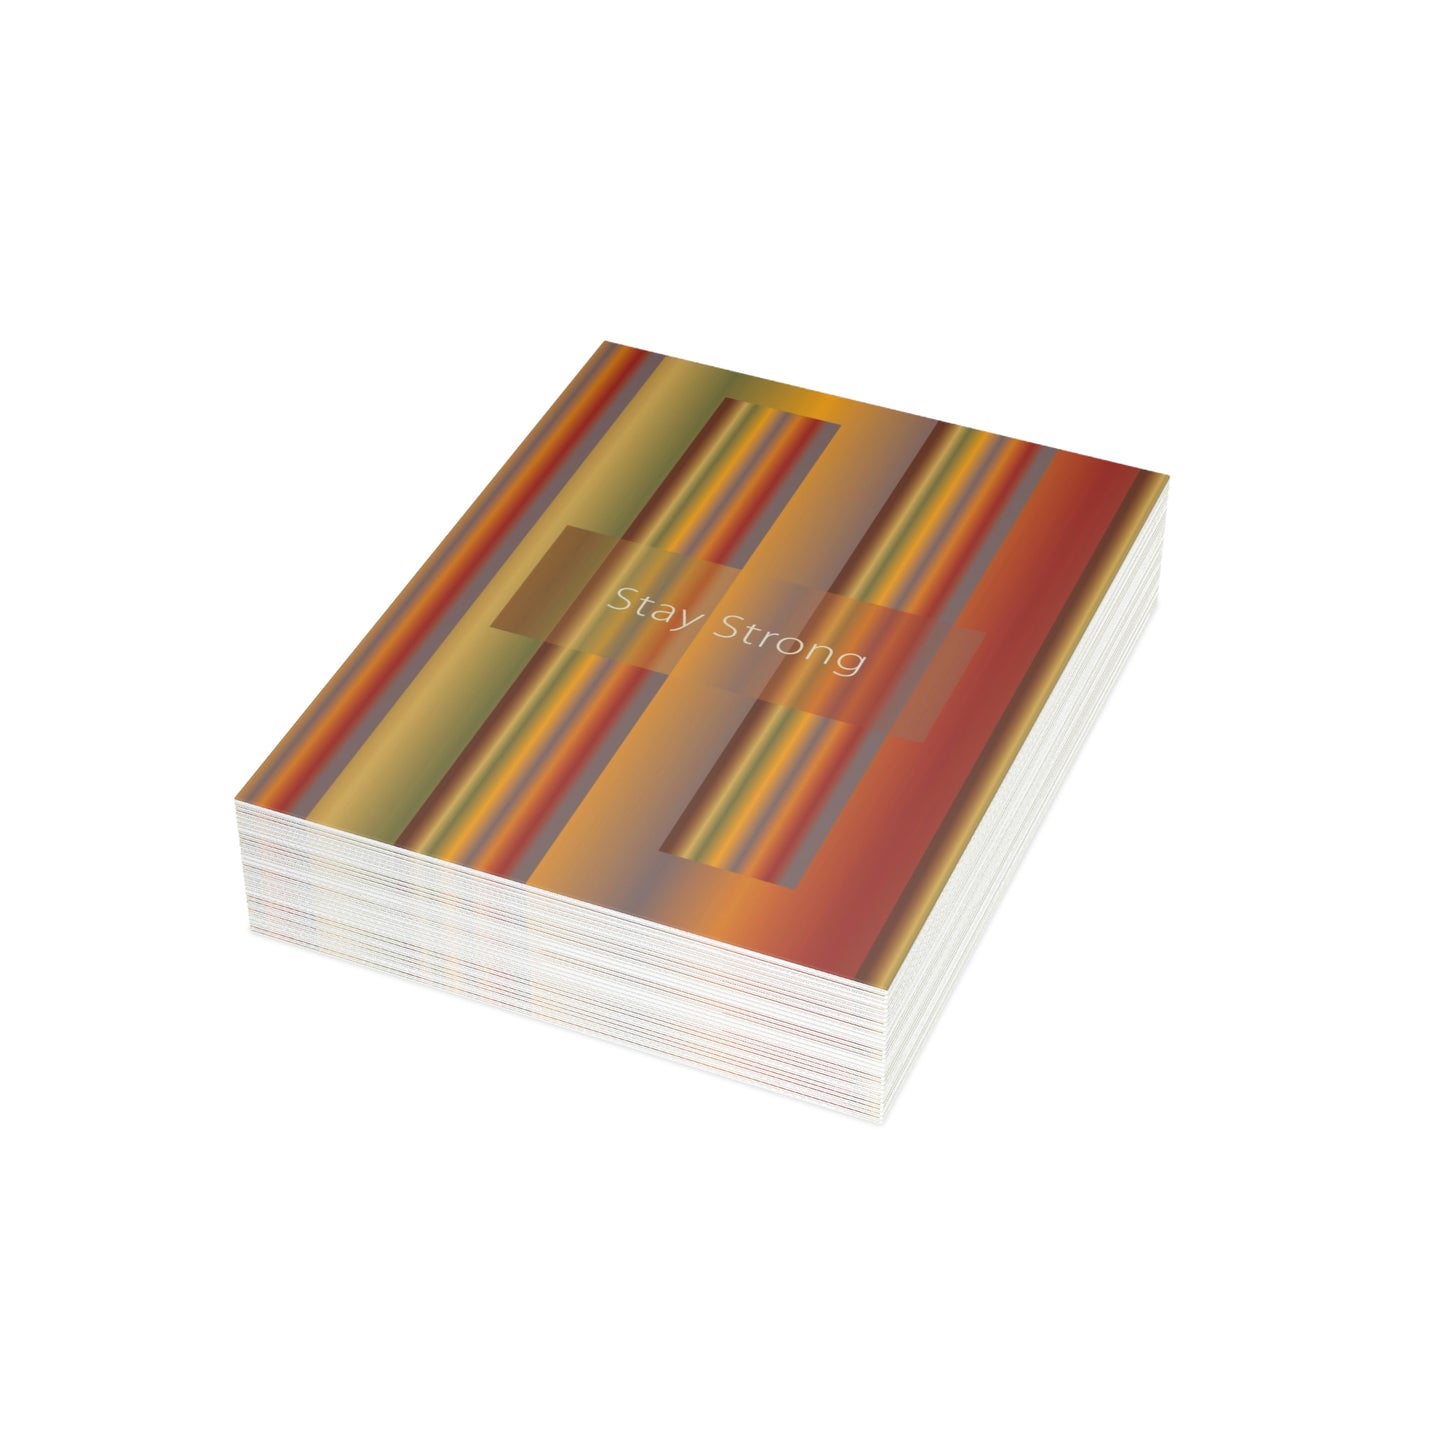 Folded Greeting Cards Vertical (1, 10, 30, and 50pcs) Stay Strong - Design No.1700